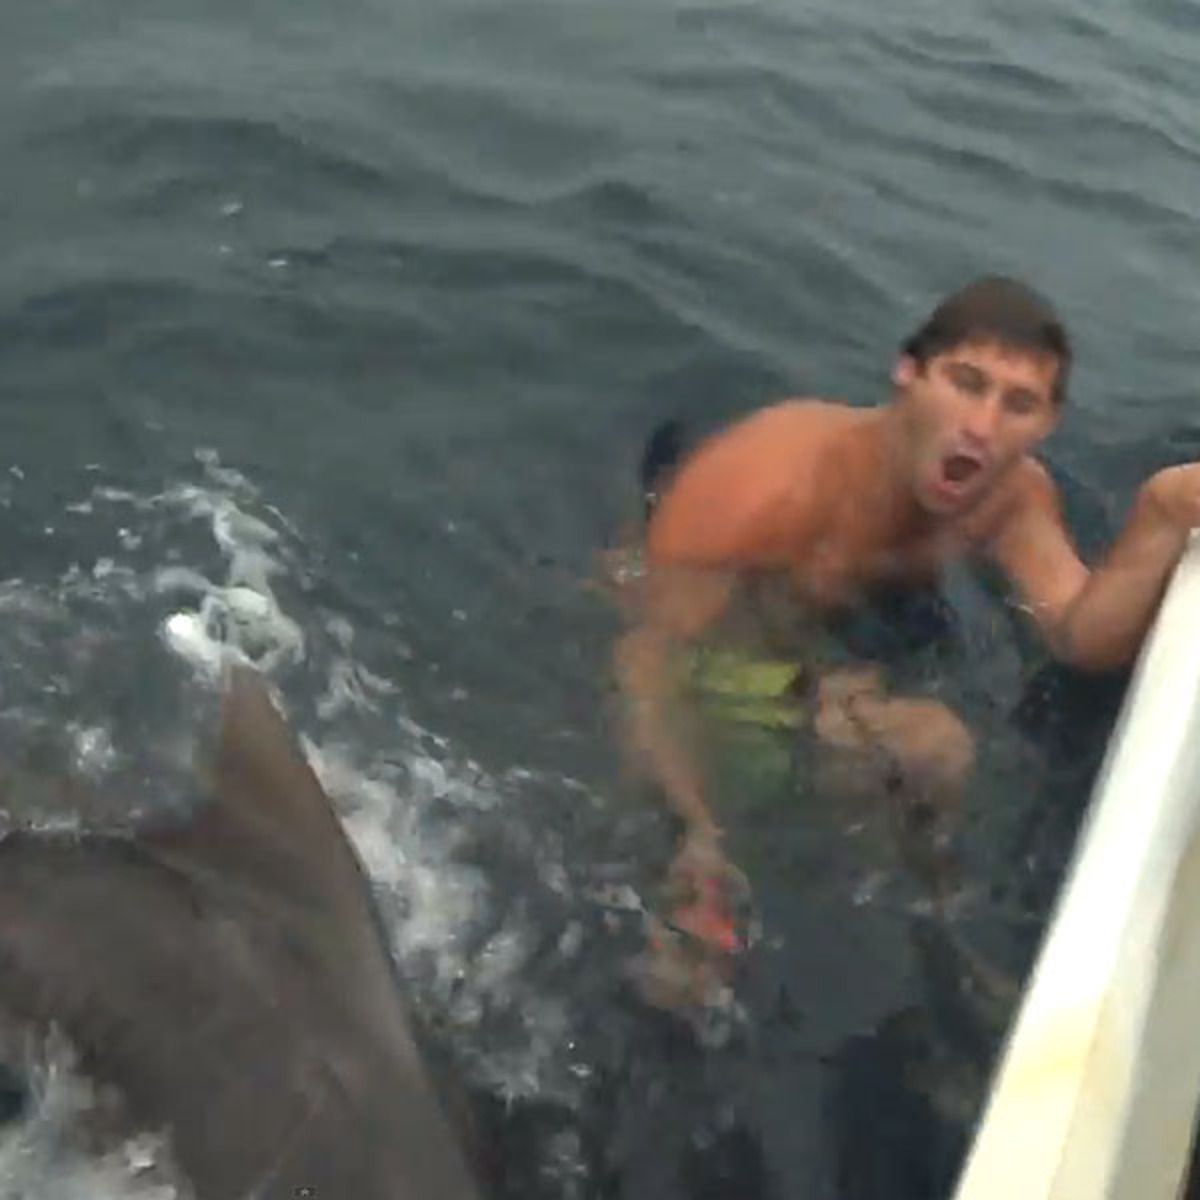 Soon Fascinate Ride Watch: Viral Video Shows Man Almost Being Attacked By a Shark - E! Online